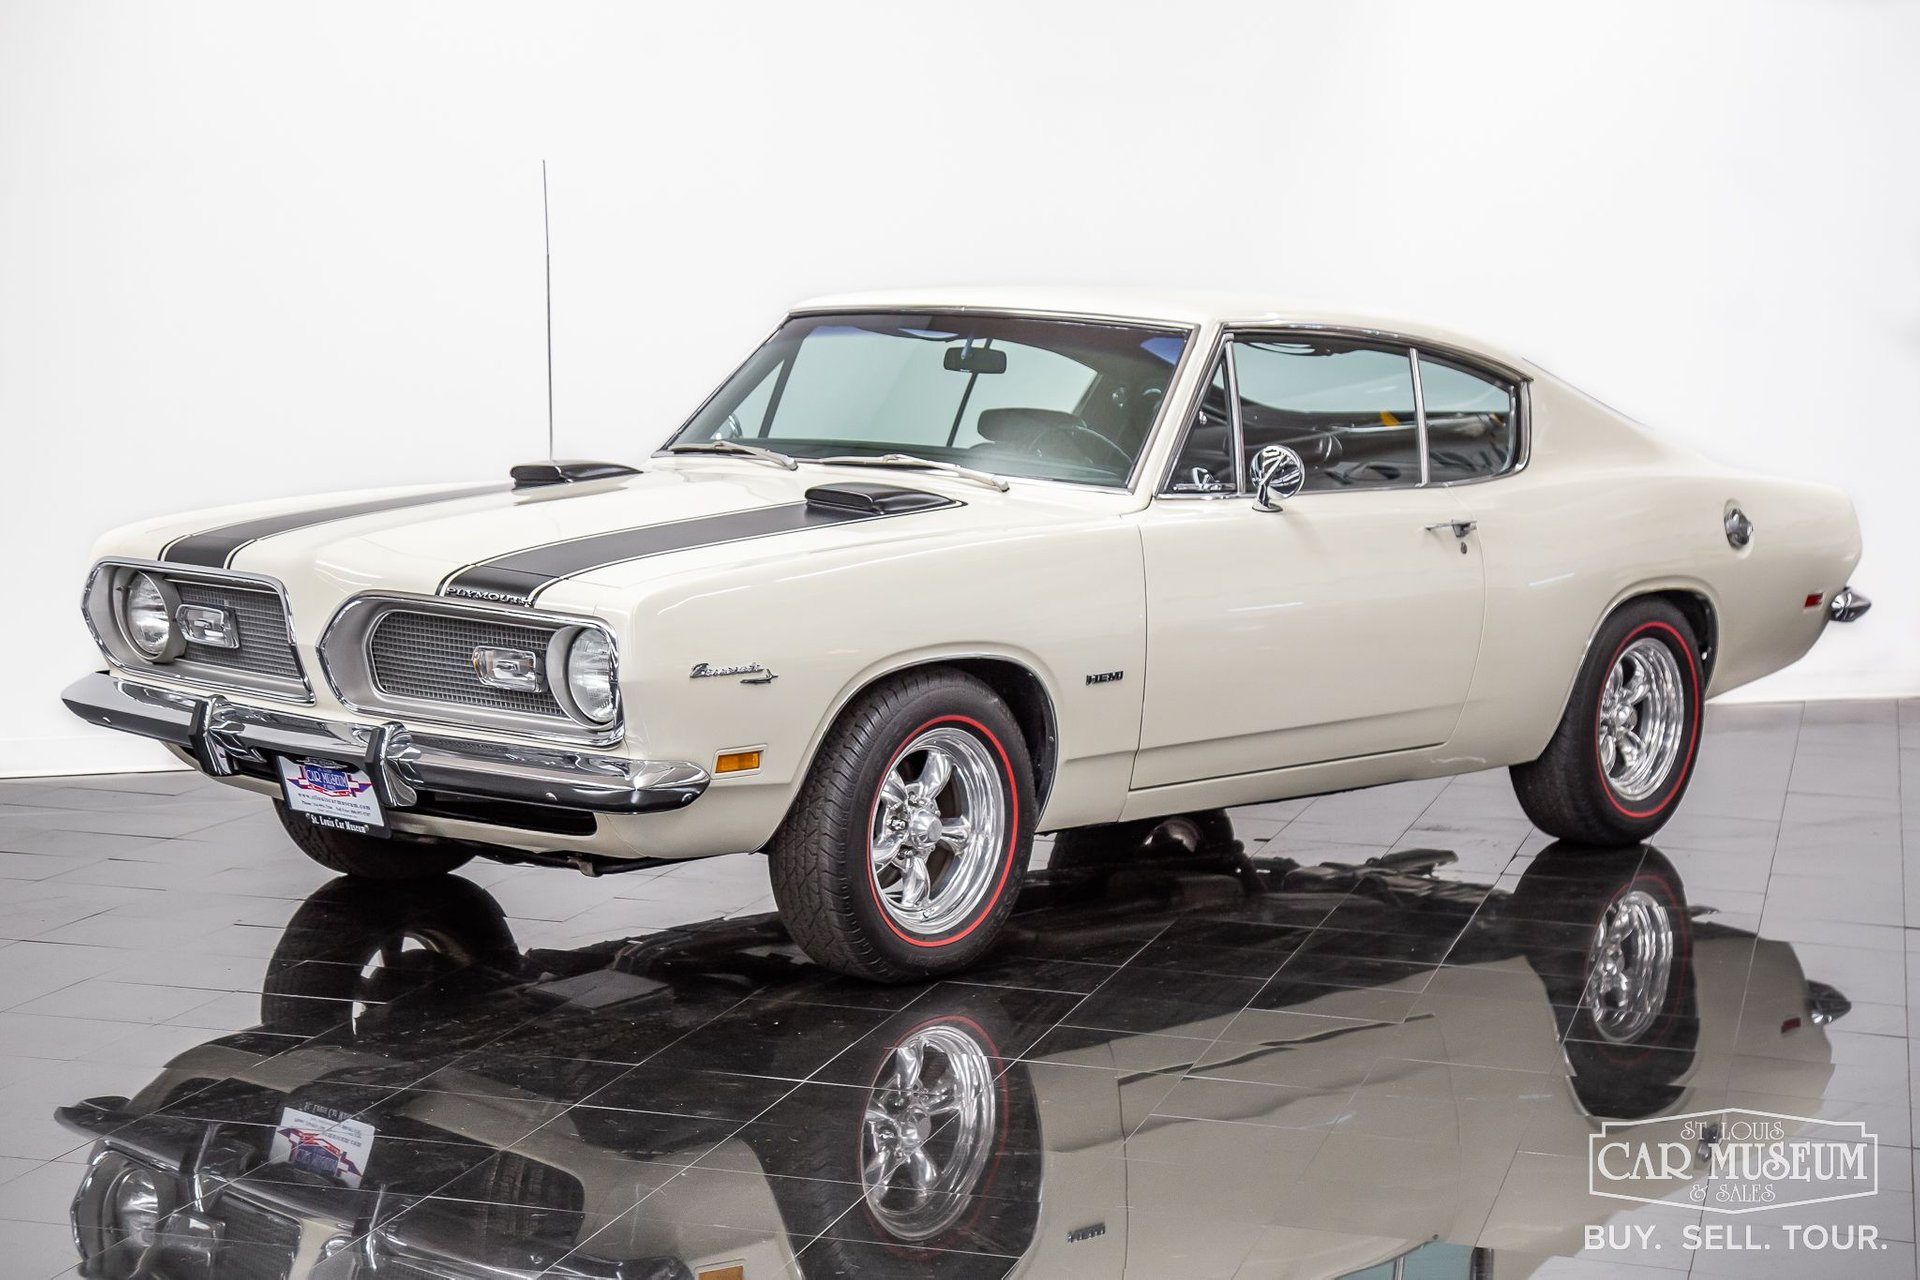 1969 Plymouth Barracuda For Sale | St. Louis Car Museum